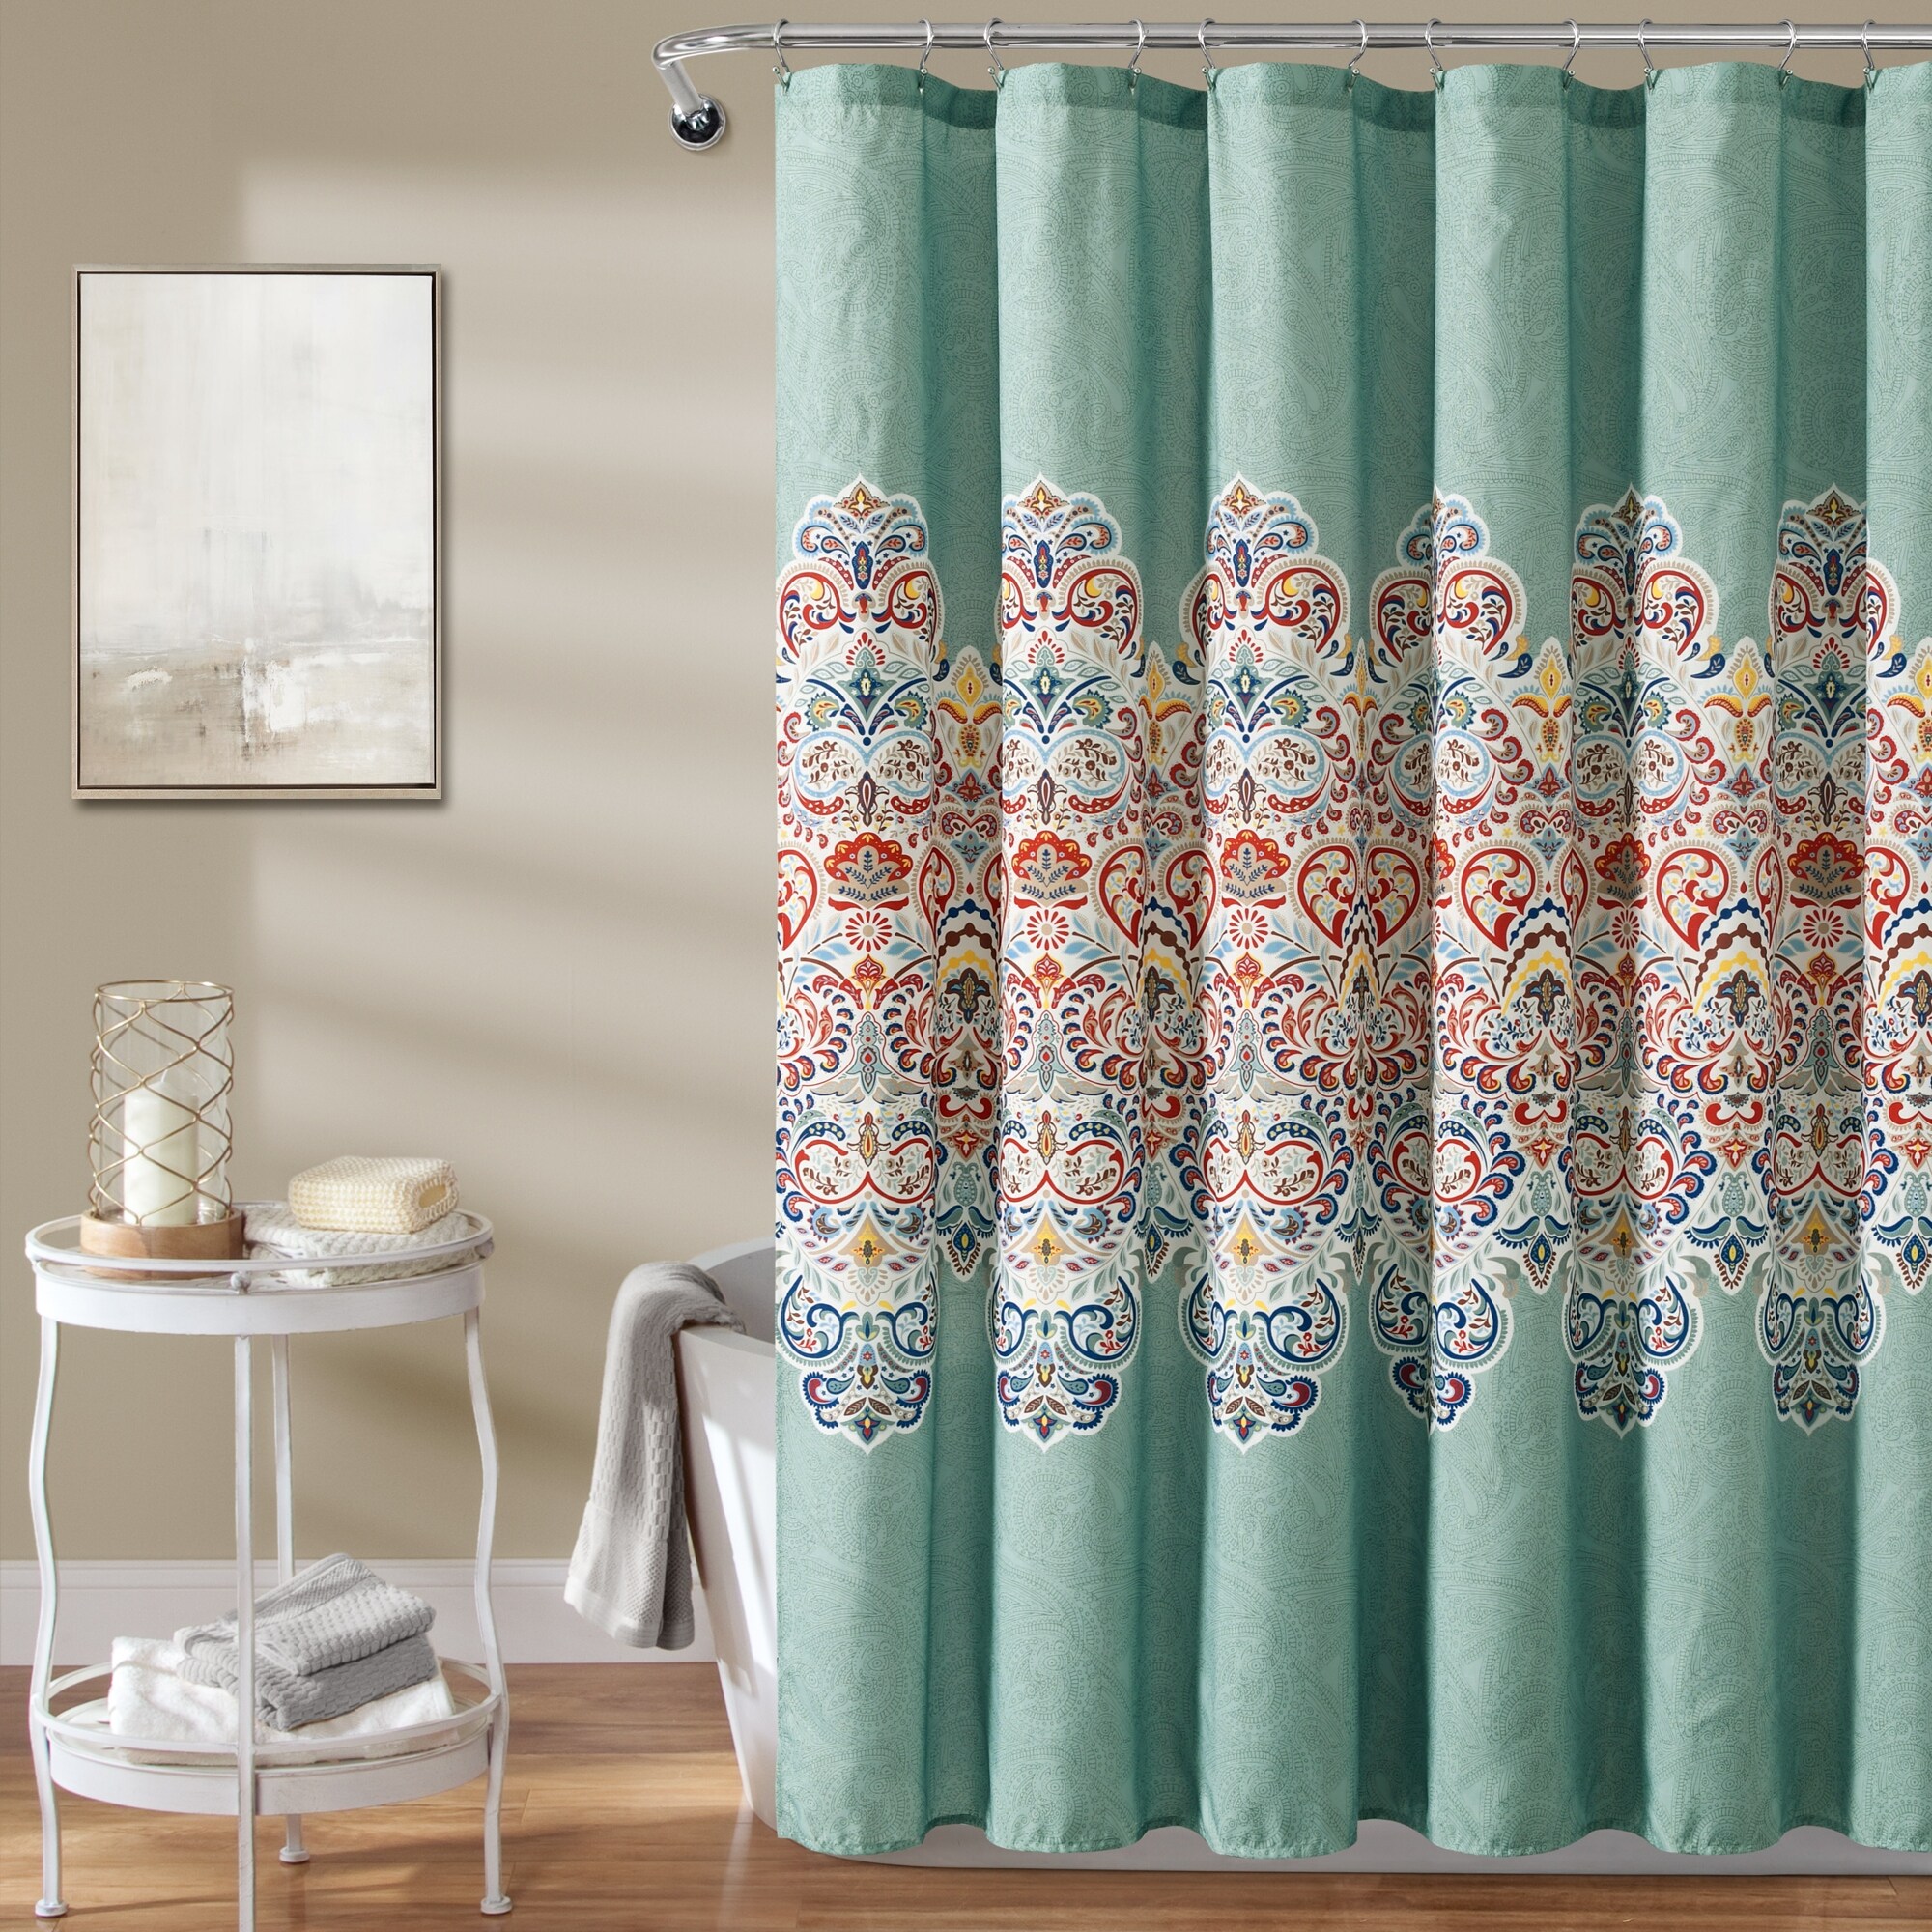 https://ak1.ostkcdn.com/images/products/is/images/direct/082997571a00a75198893fcb6044d53ea132ba9f/Lush-Decor-Boho-Chic-Shower-Curtain-with-Peva-Lining-and-Rings-Set.jpg